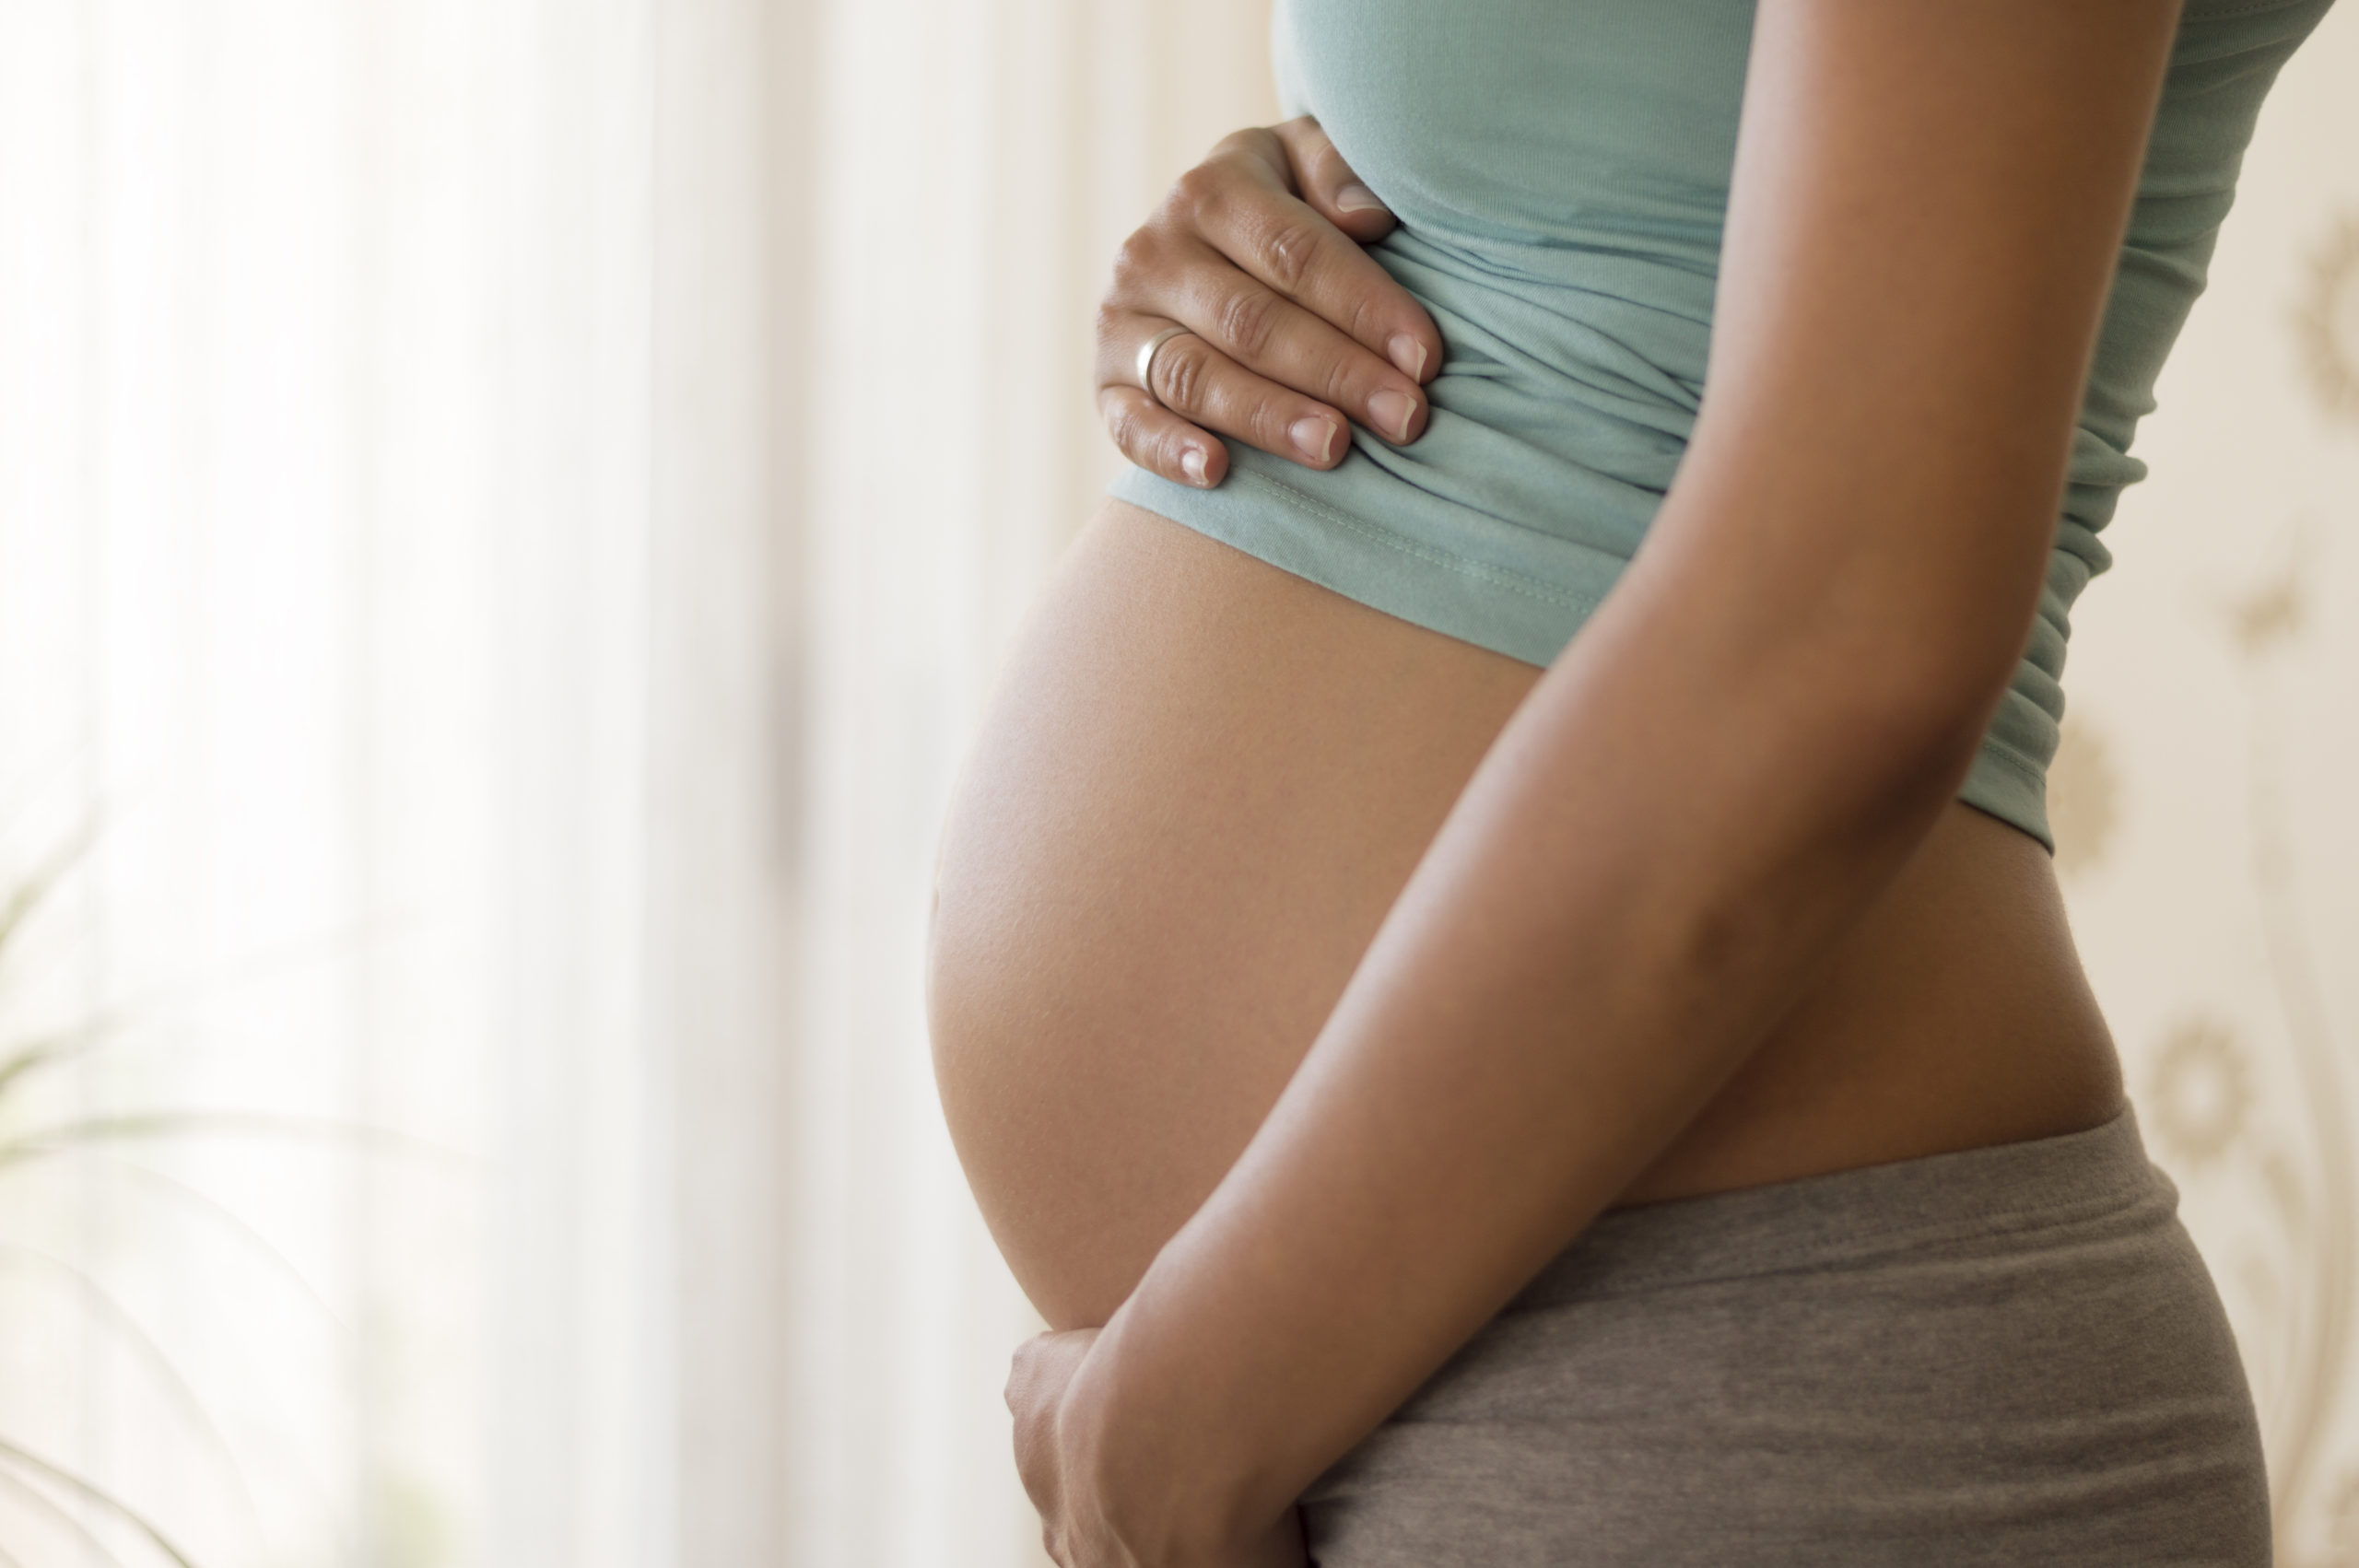 Tummy Tucks Before & After Pregnancy: What You Need To Know